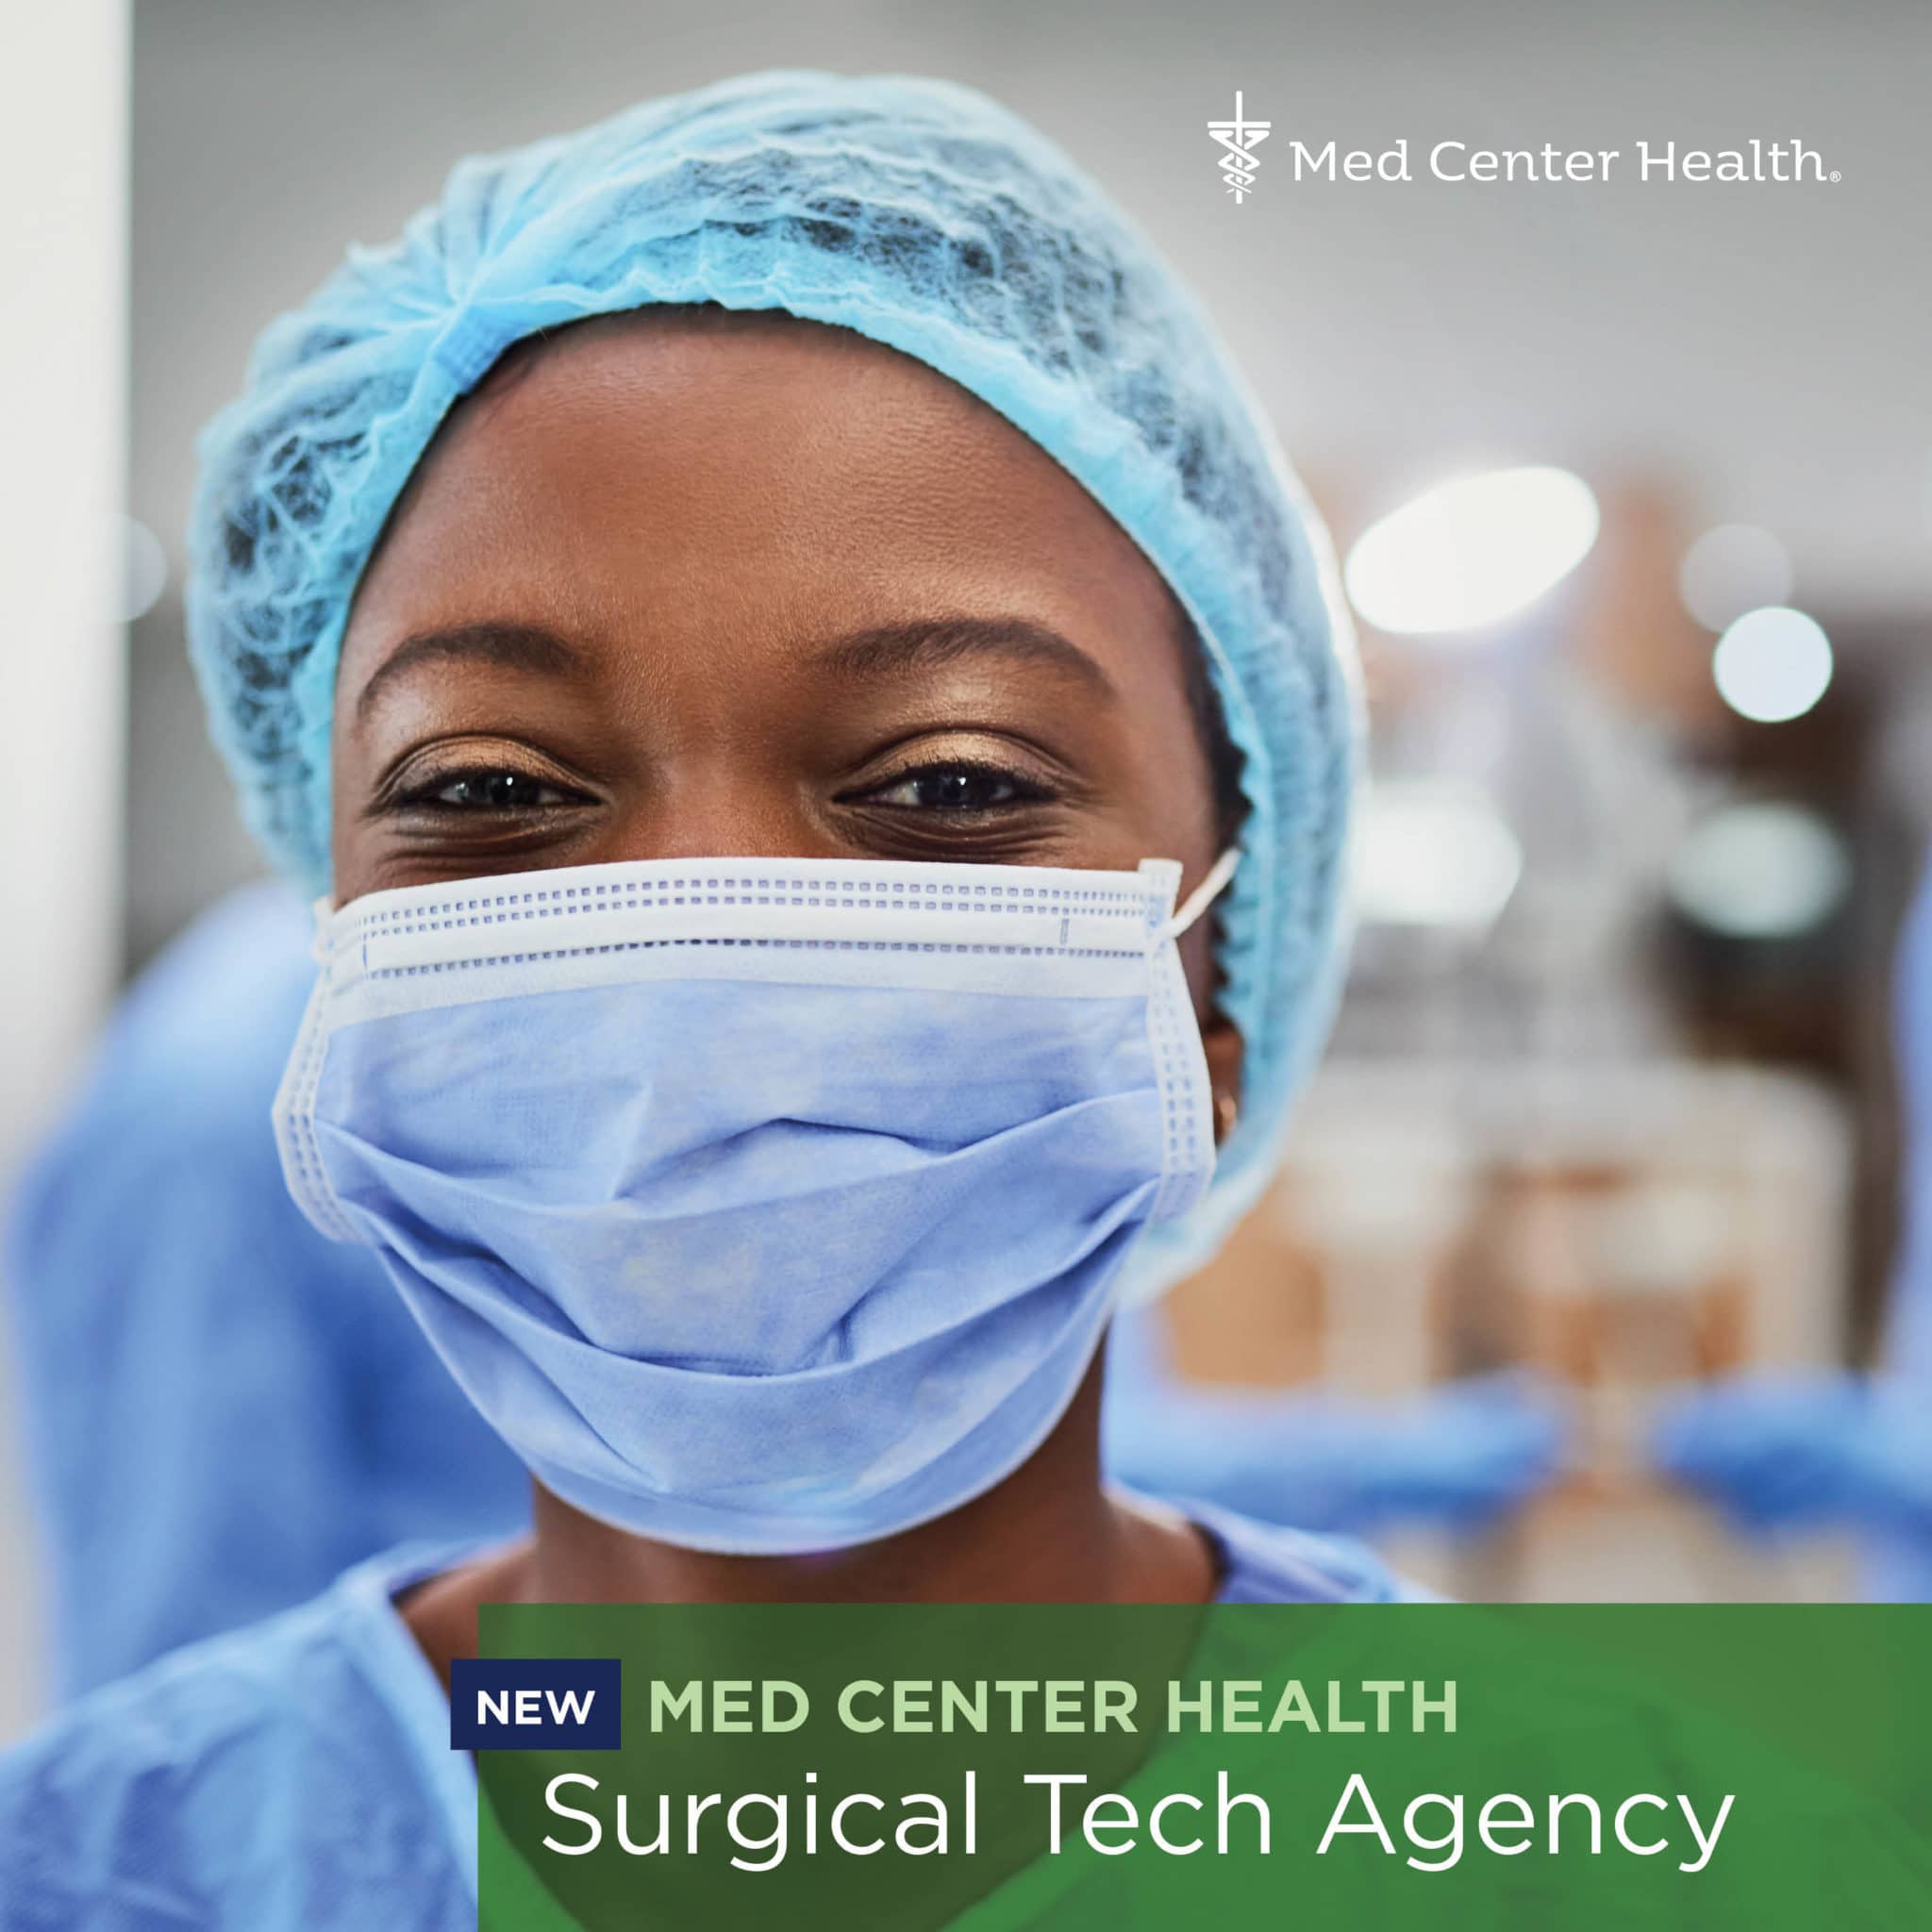 Become a Med Center Health Agency Surgical Tech